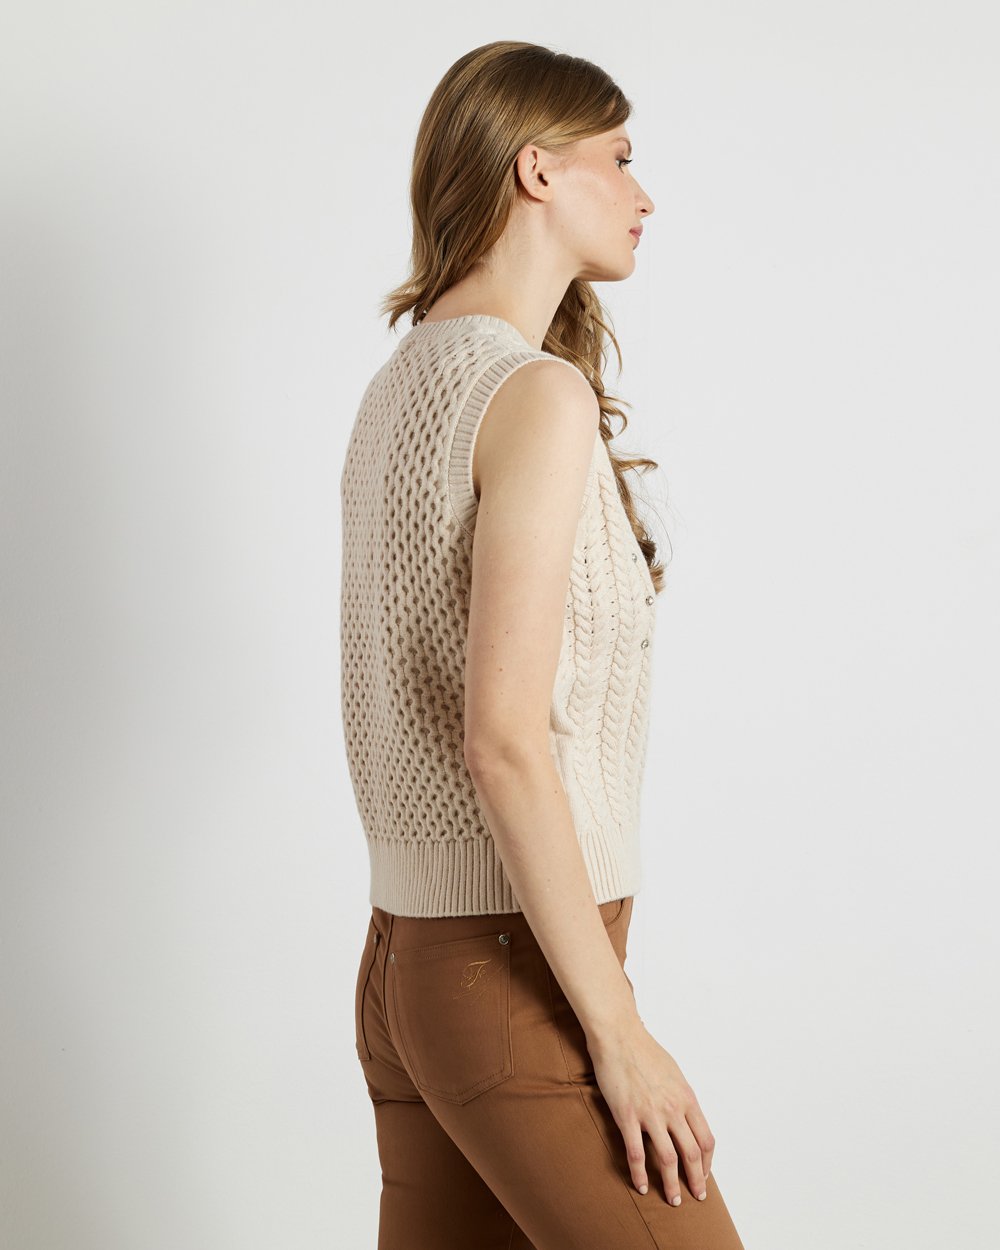 Knitted camisole